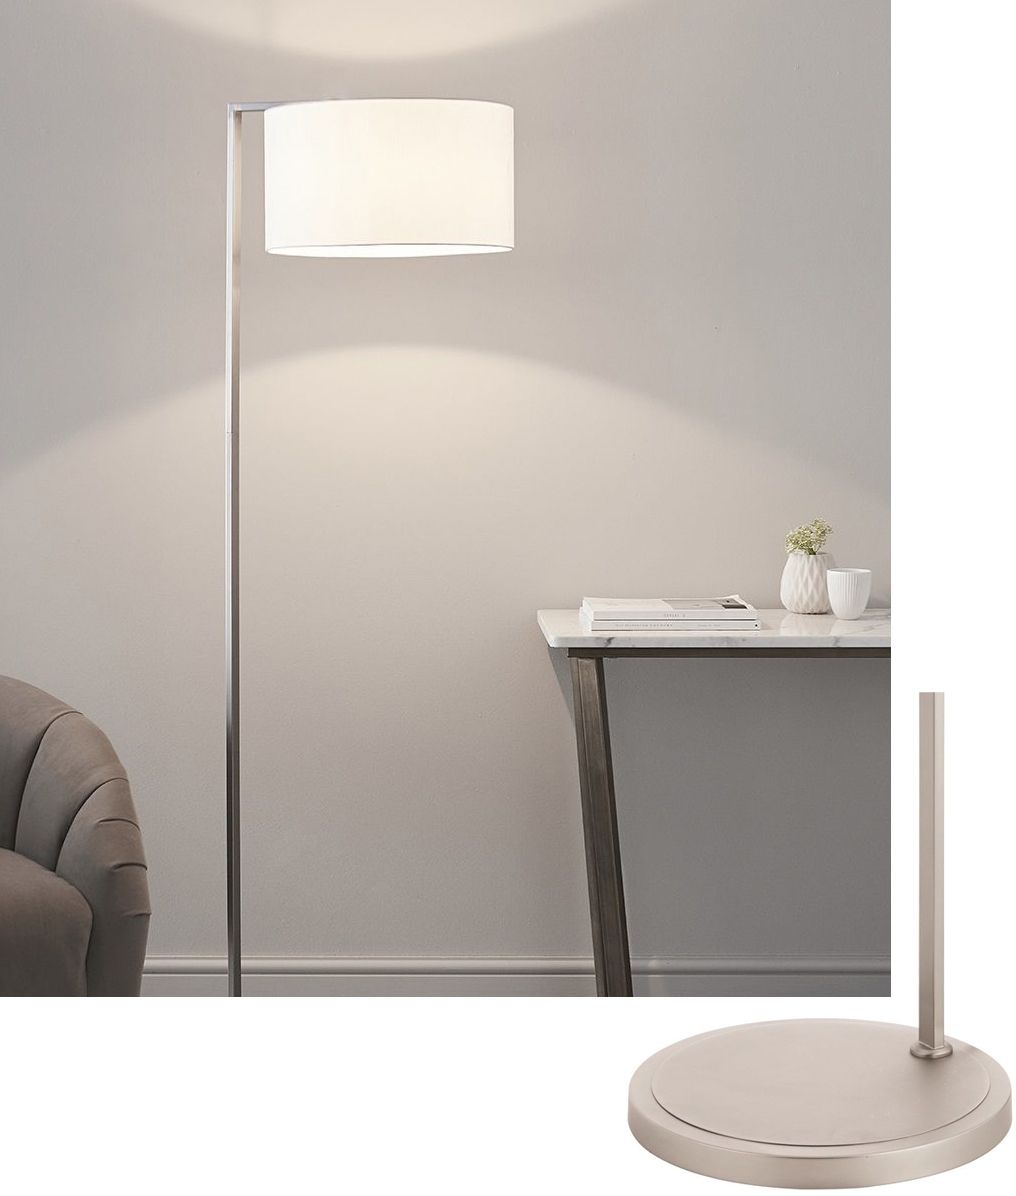 Matt Nickel Contemporary Floor Lamp With Fabric Drum Shade Intended For White Shade Floor Lamps (View 1 of 15)